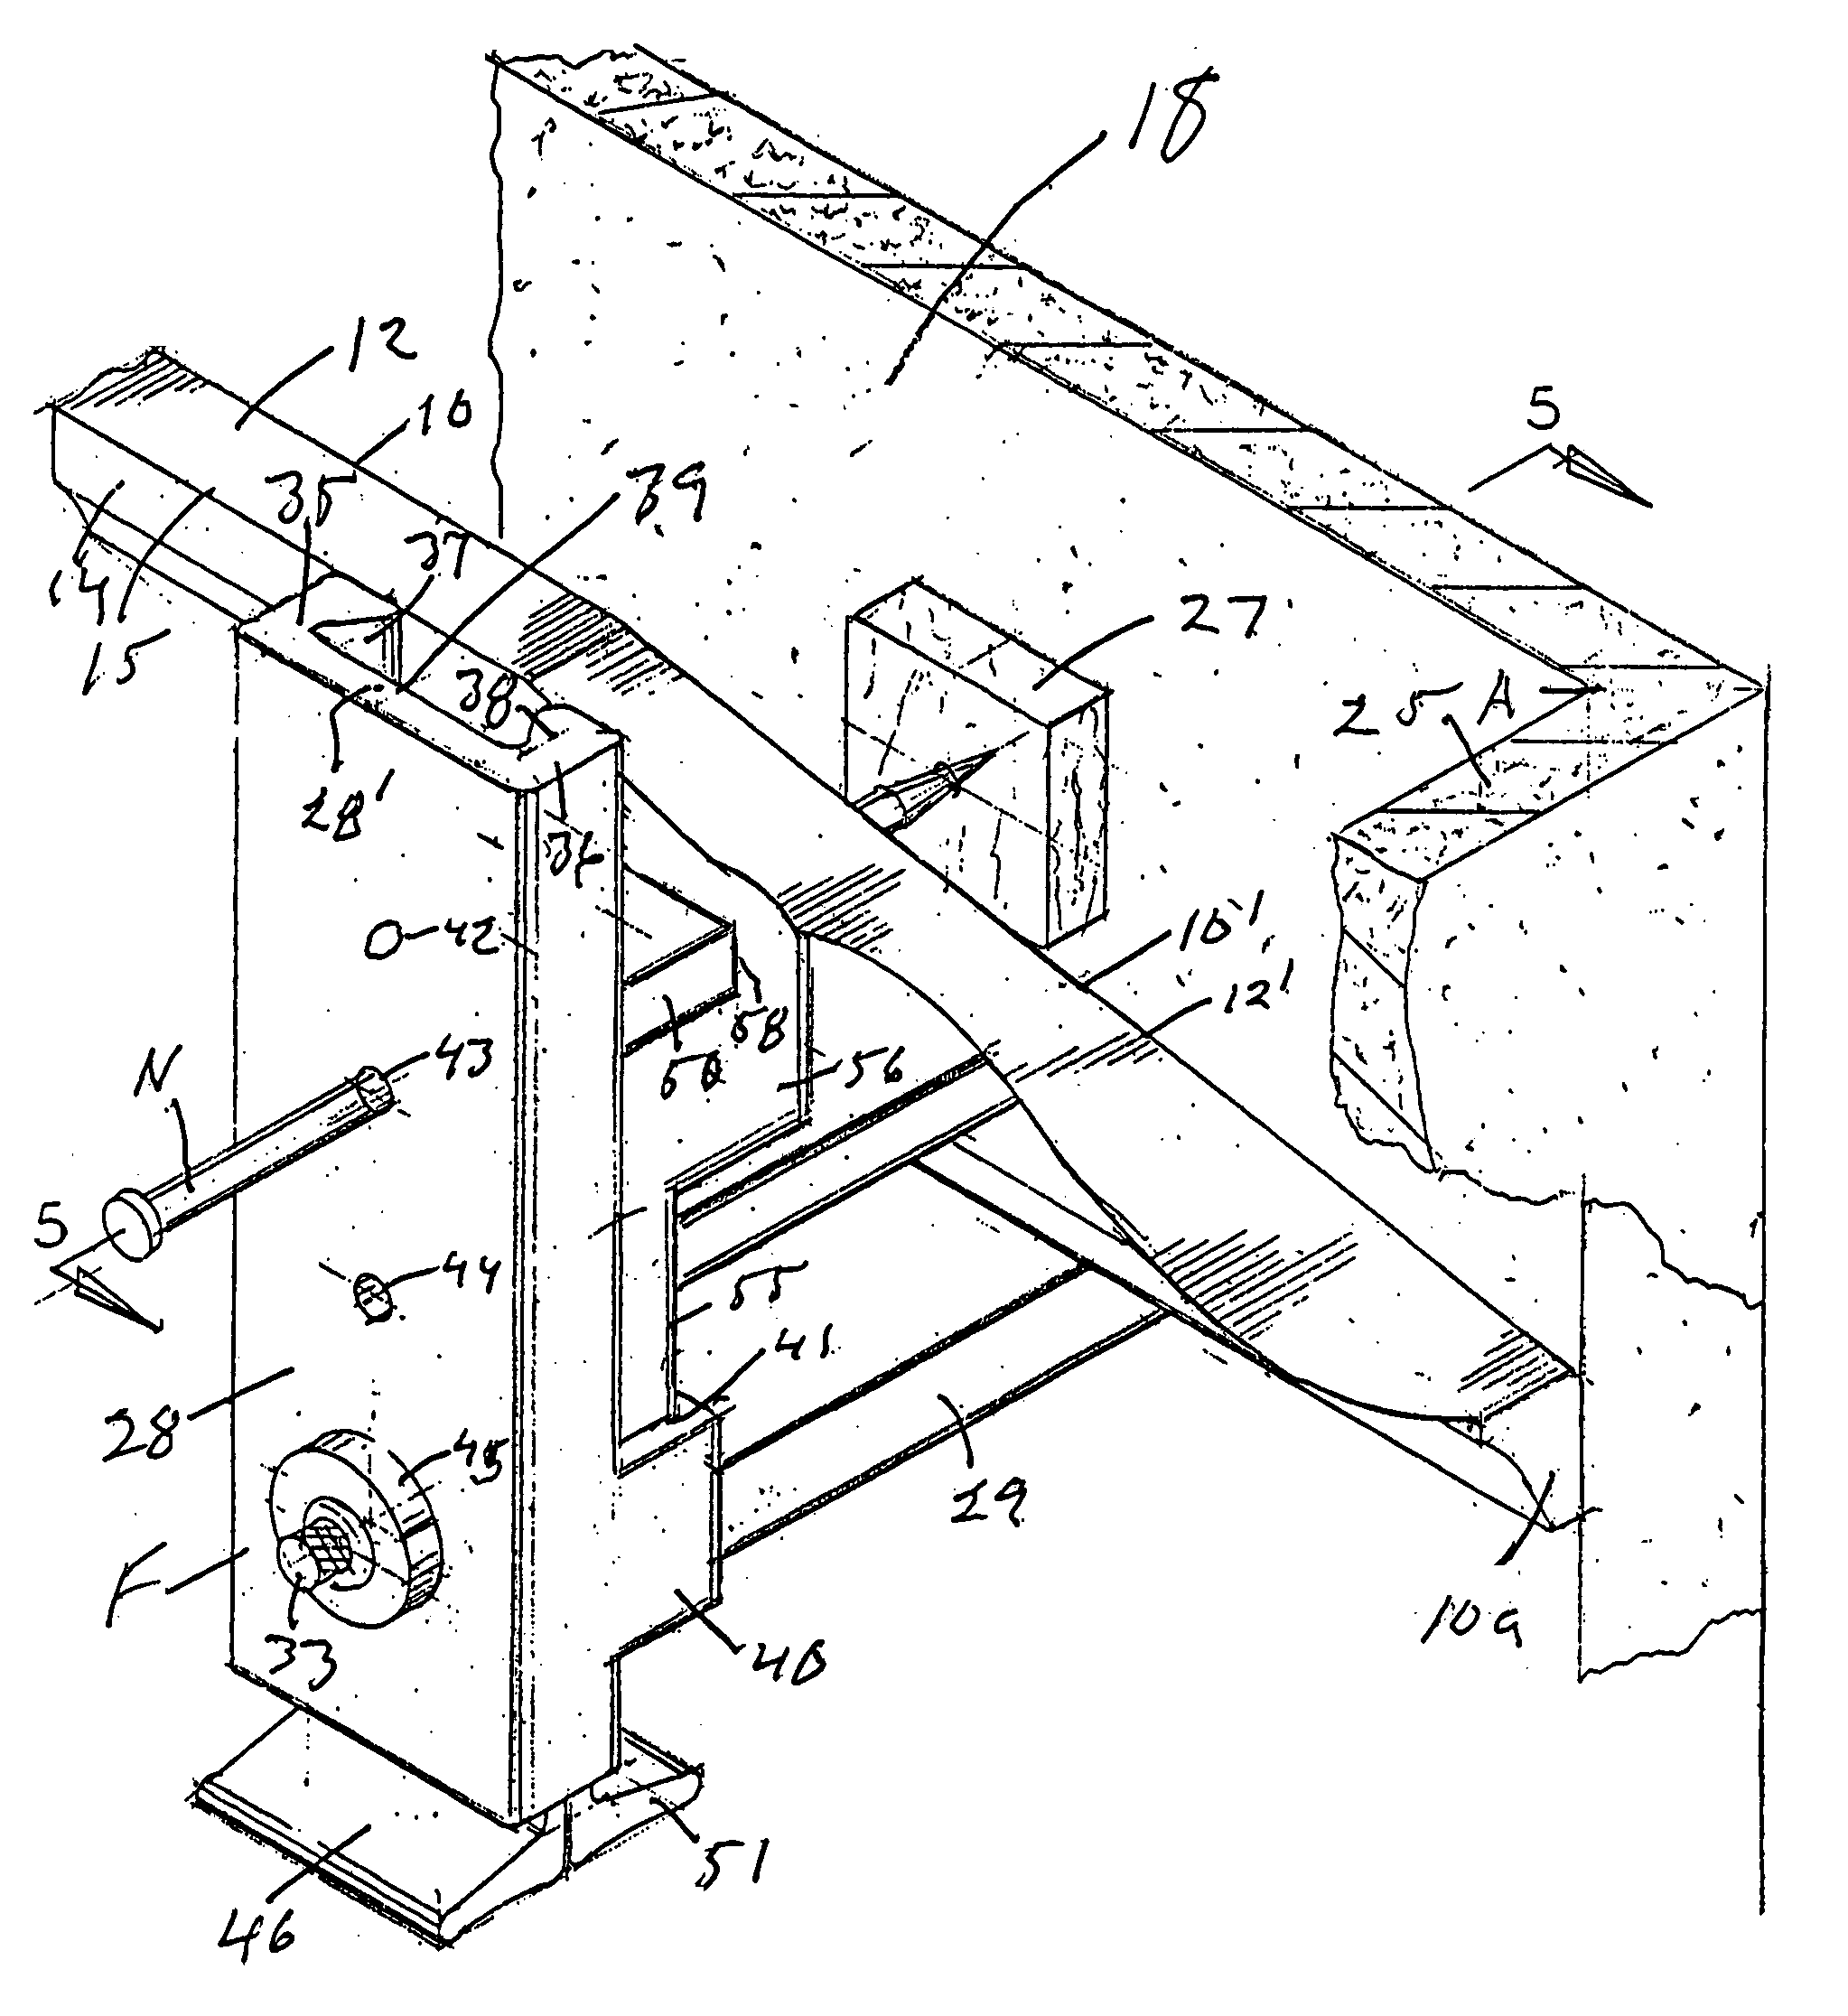 Crown molding clamp